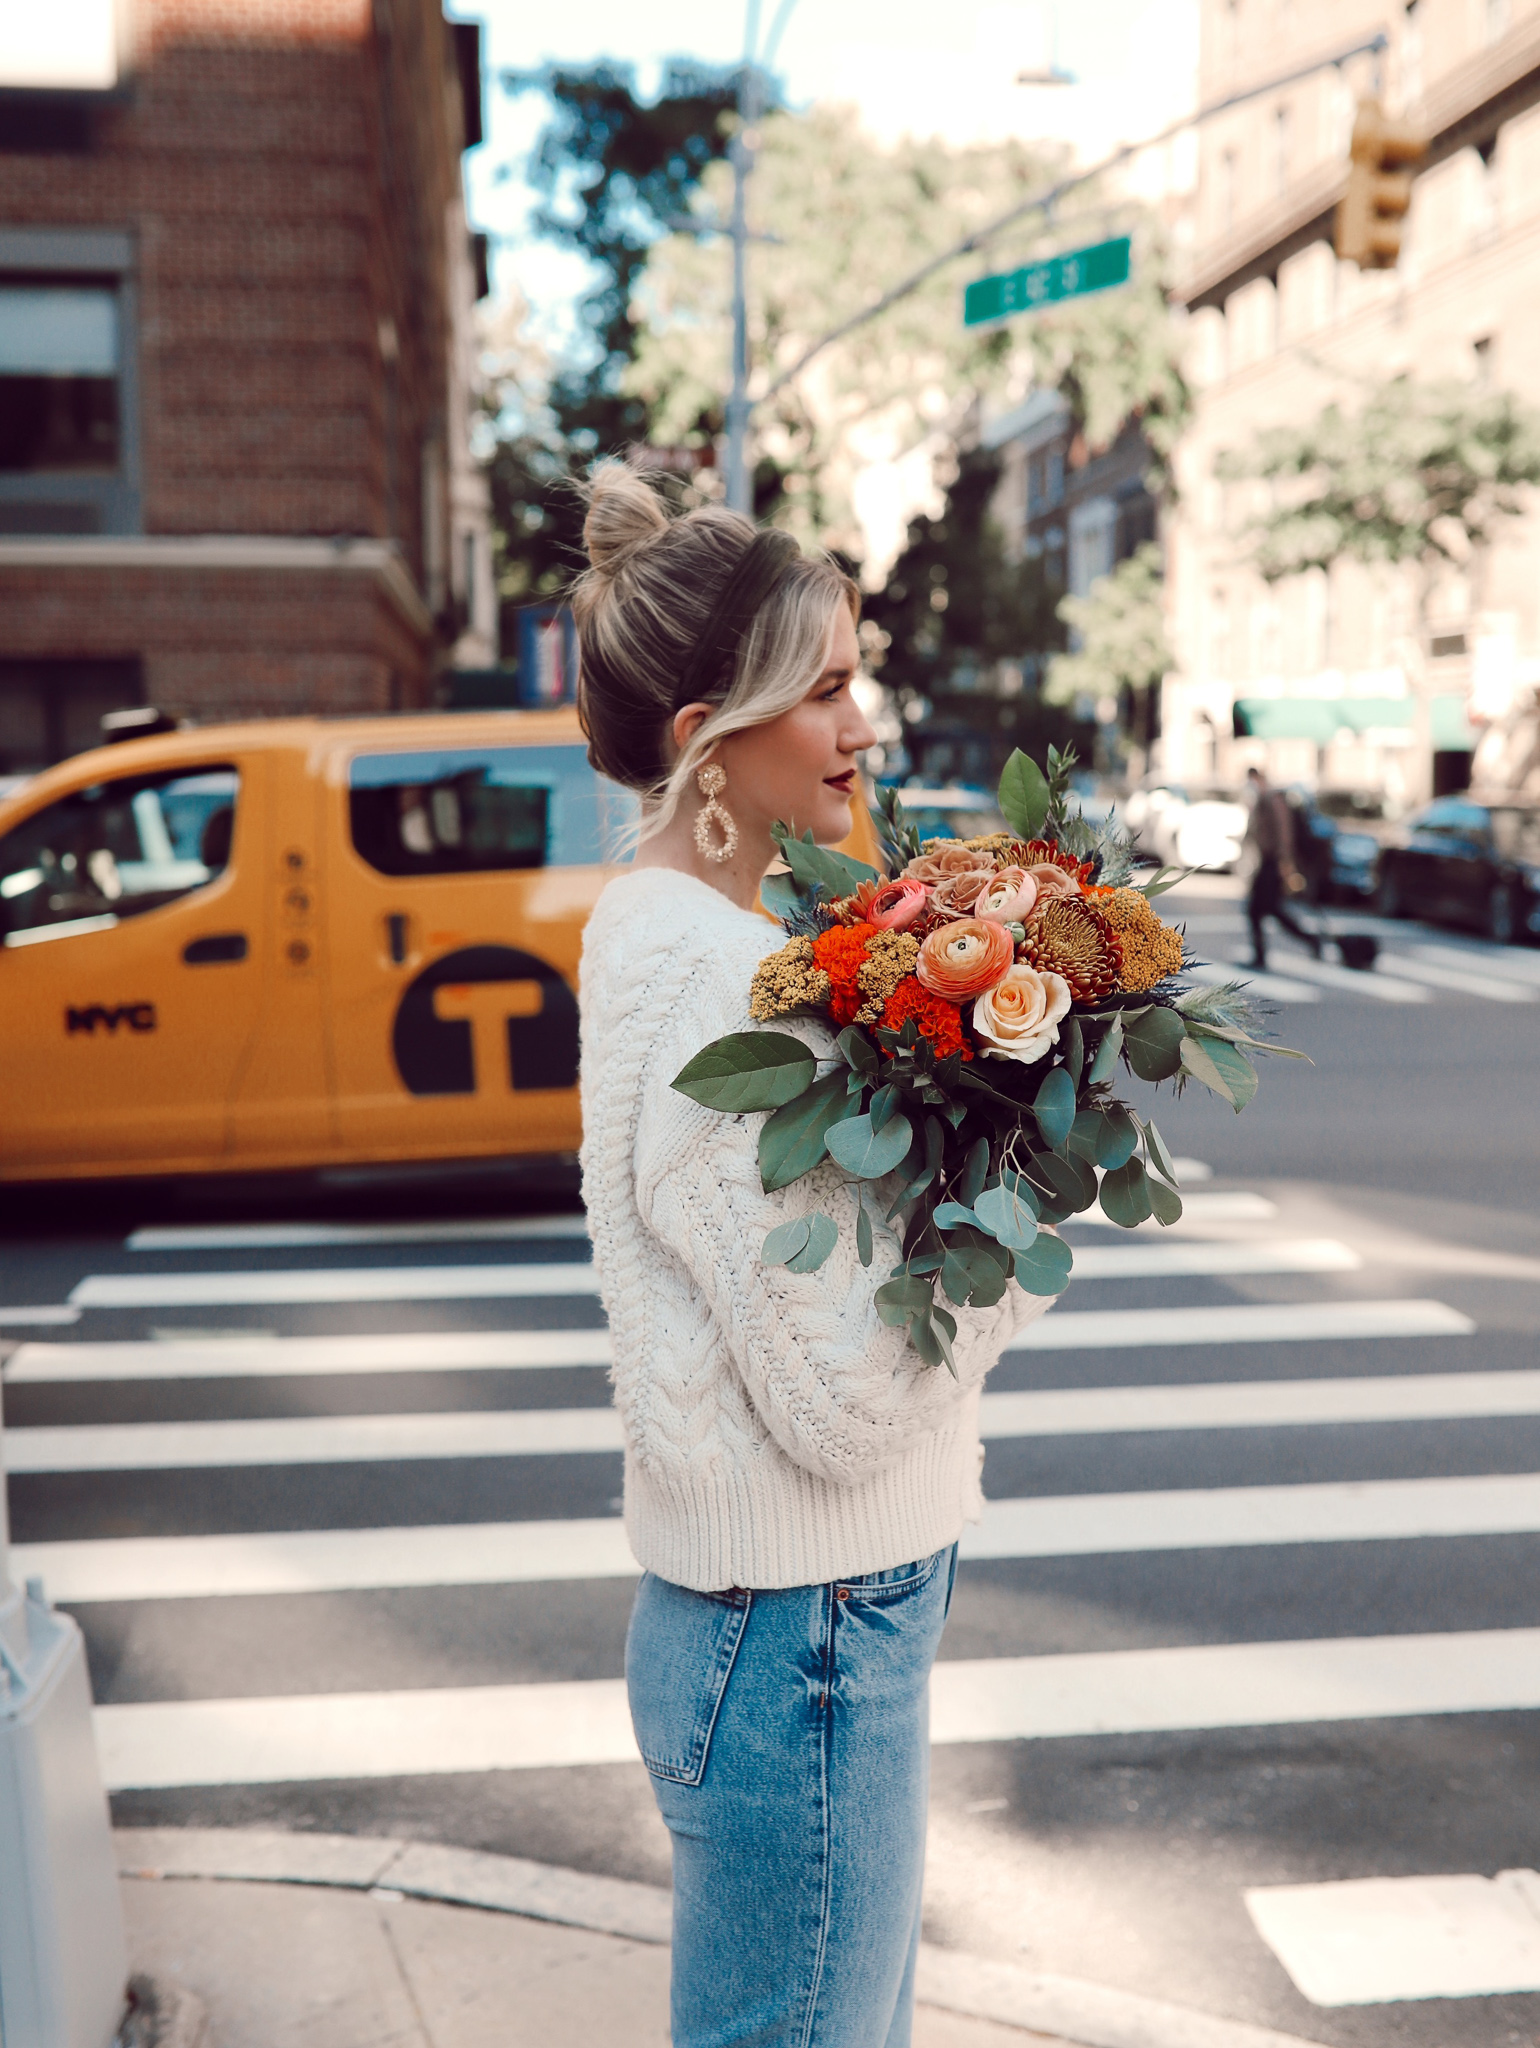 Anna in the street of New York City with a yellow taxi in the back with flowers in her hand.